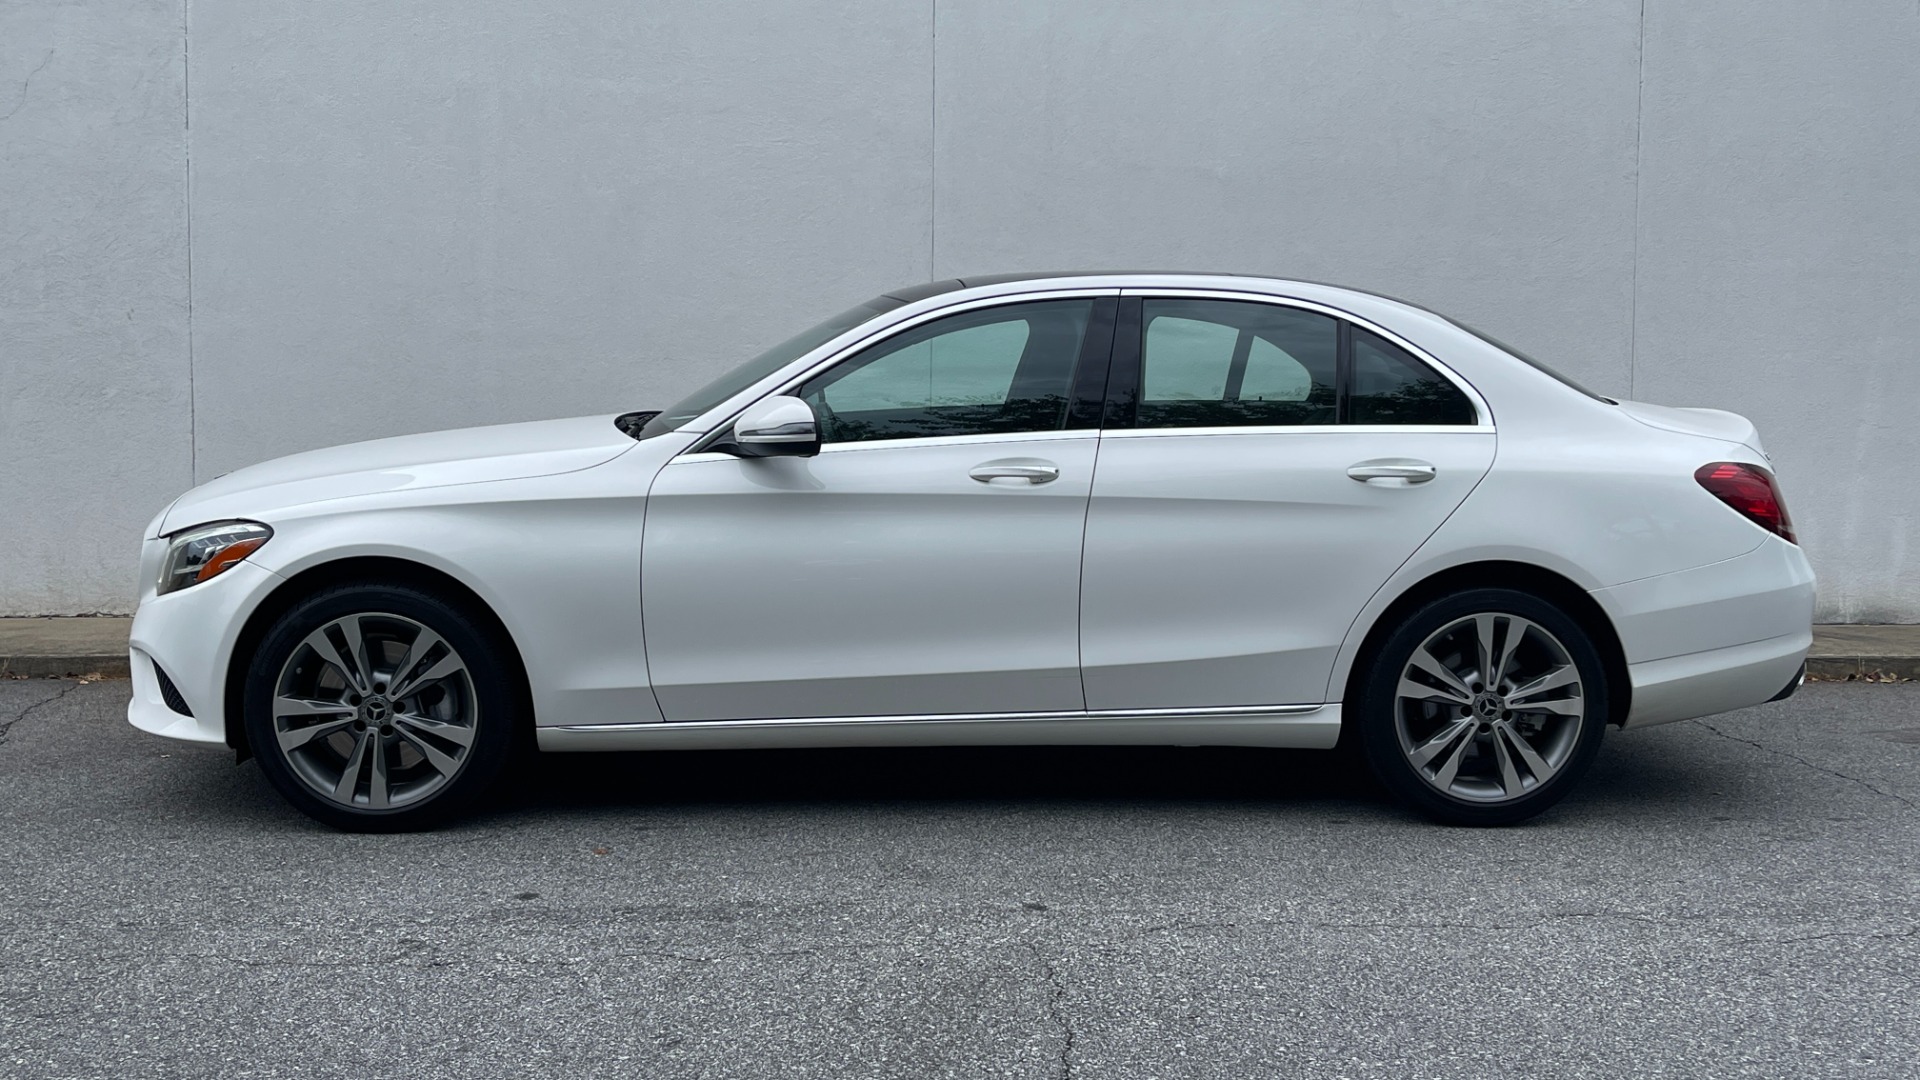 Used 2019 Mercedes-Benz C-Class C300 / PANORAMIC ROOF / BURMESTER / BLIND SPOT / HEATED STEERING AND SEATS for sale $34,995 at Formula Imports in Charlotte NC 28227 6